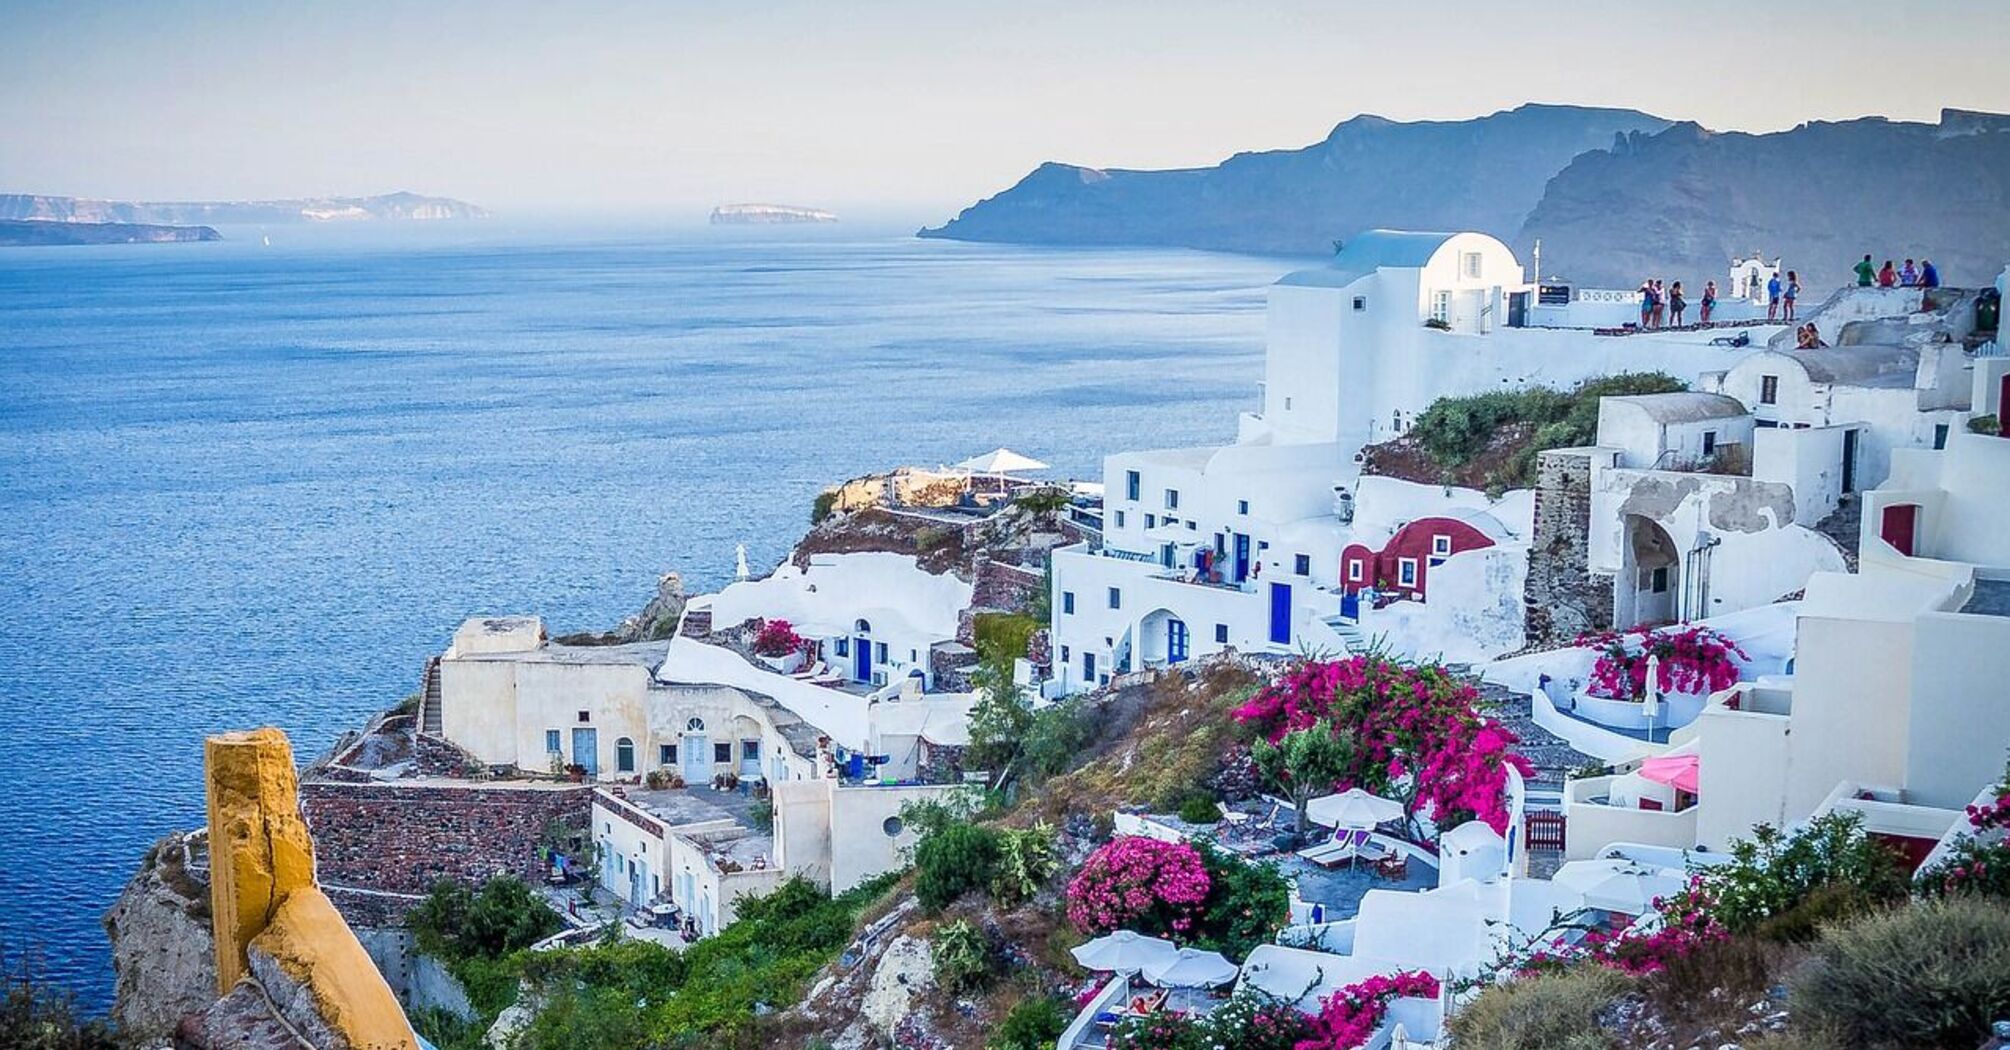 The number of tourists planning vacations in Greece has increased